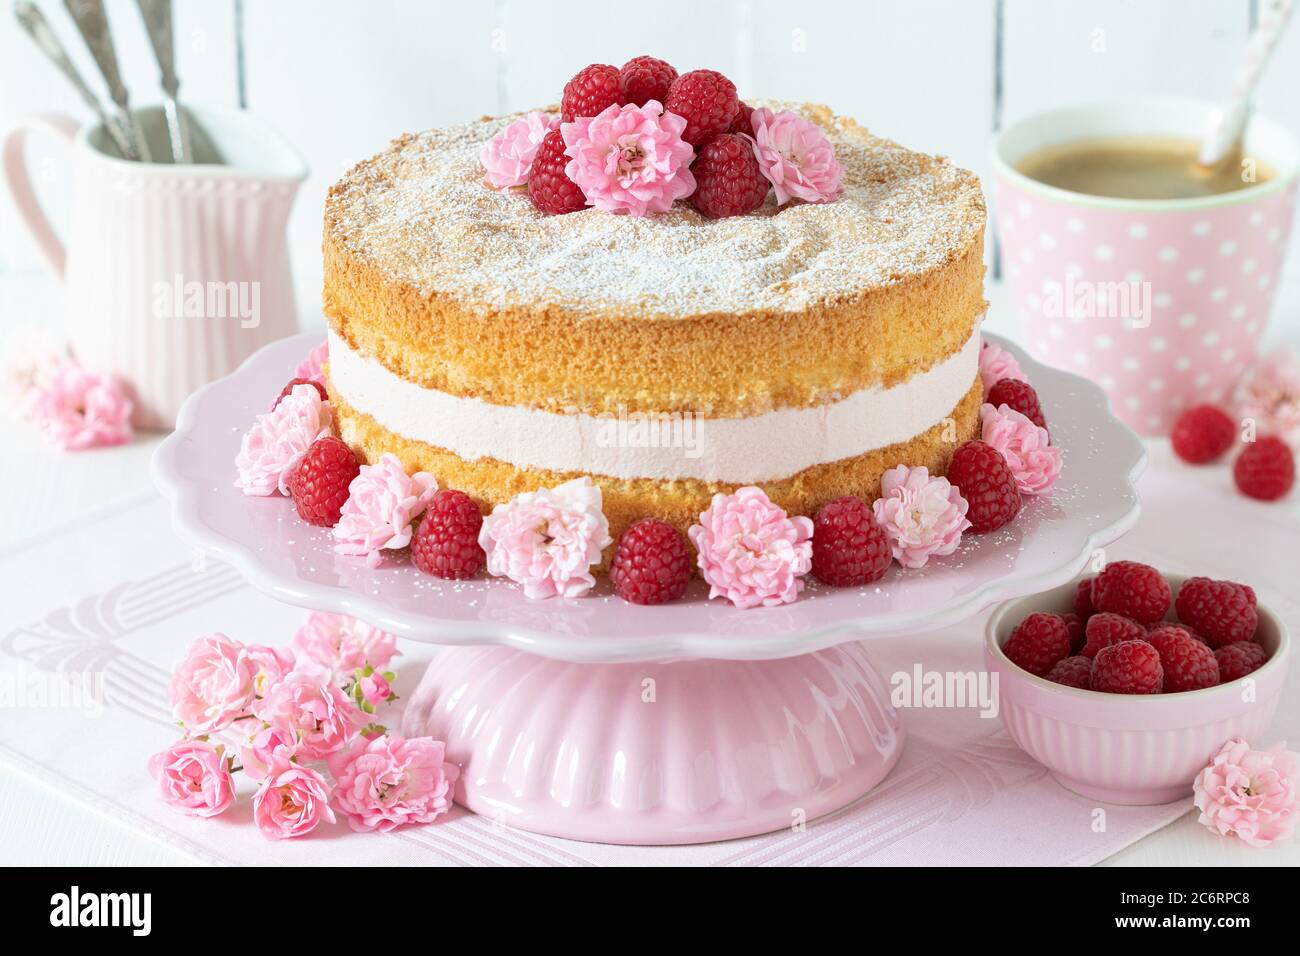 raspberry cream cake decorated with pink roses on cake plate Stock Photo